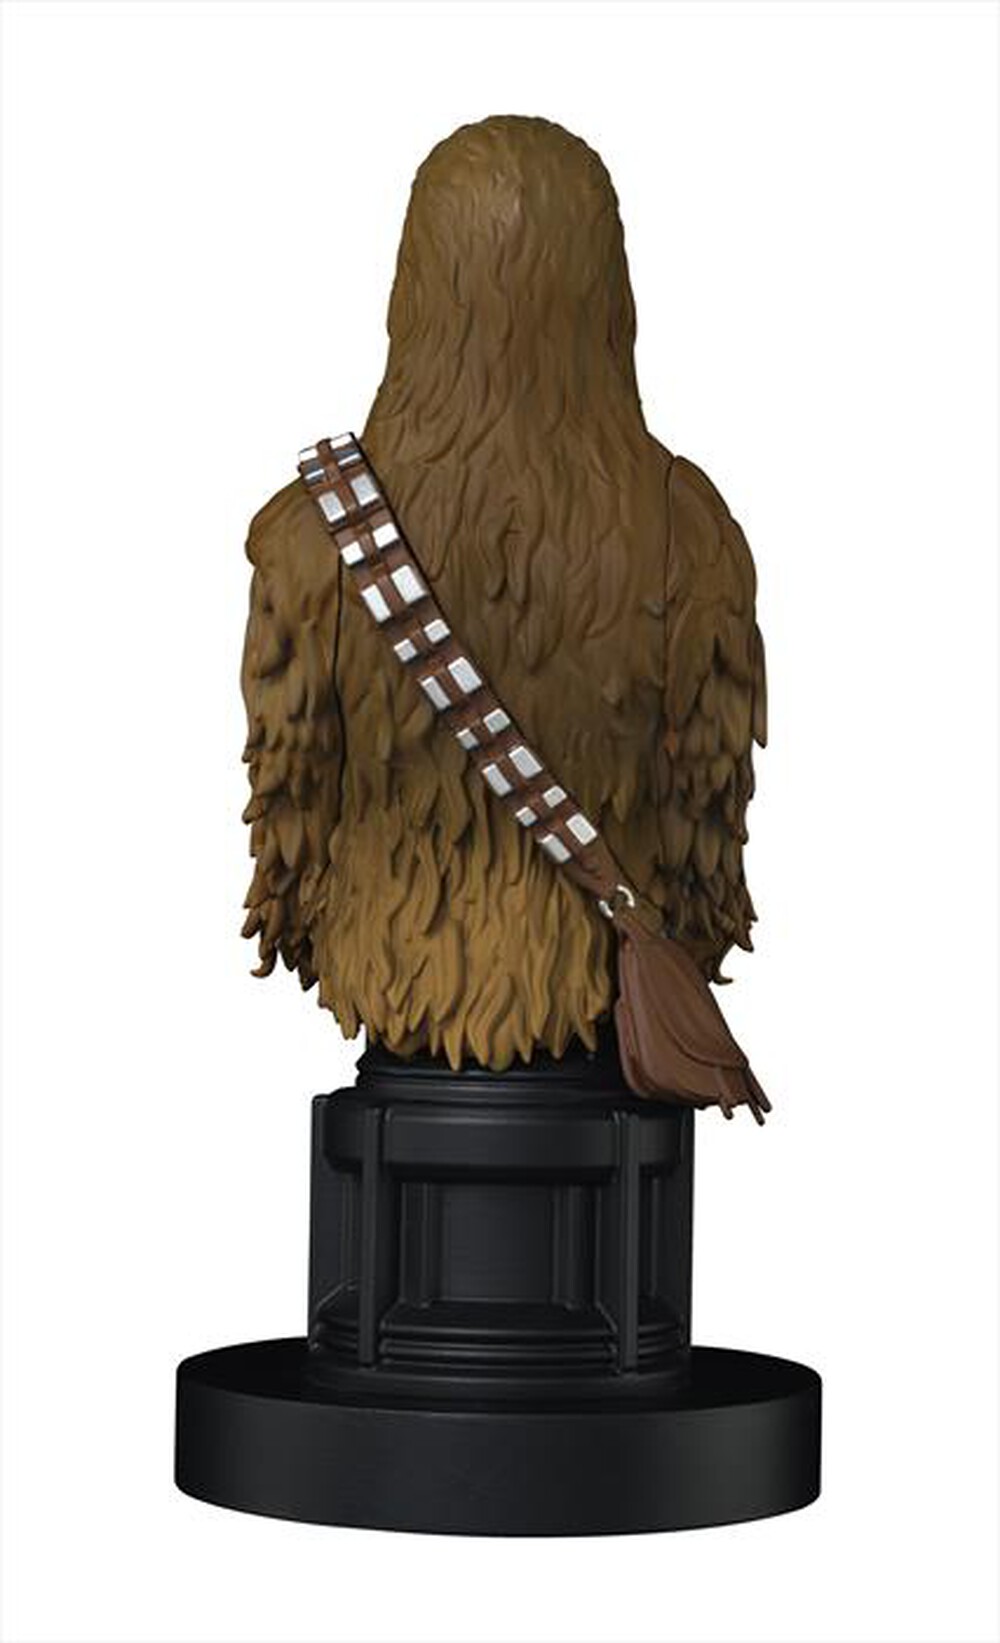 "EXQUISITE GAMING - CHEWBACCA CABLE GUY"